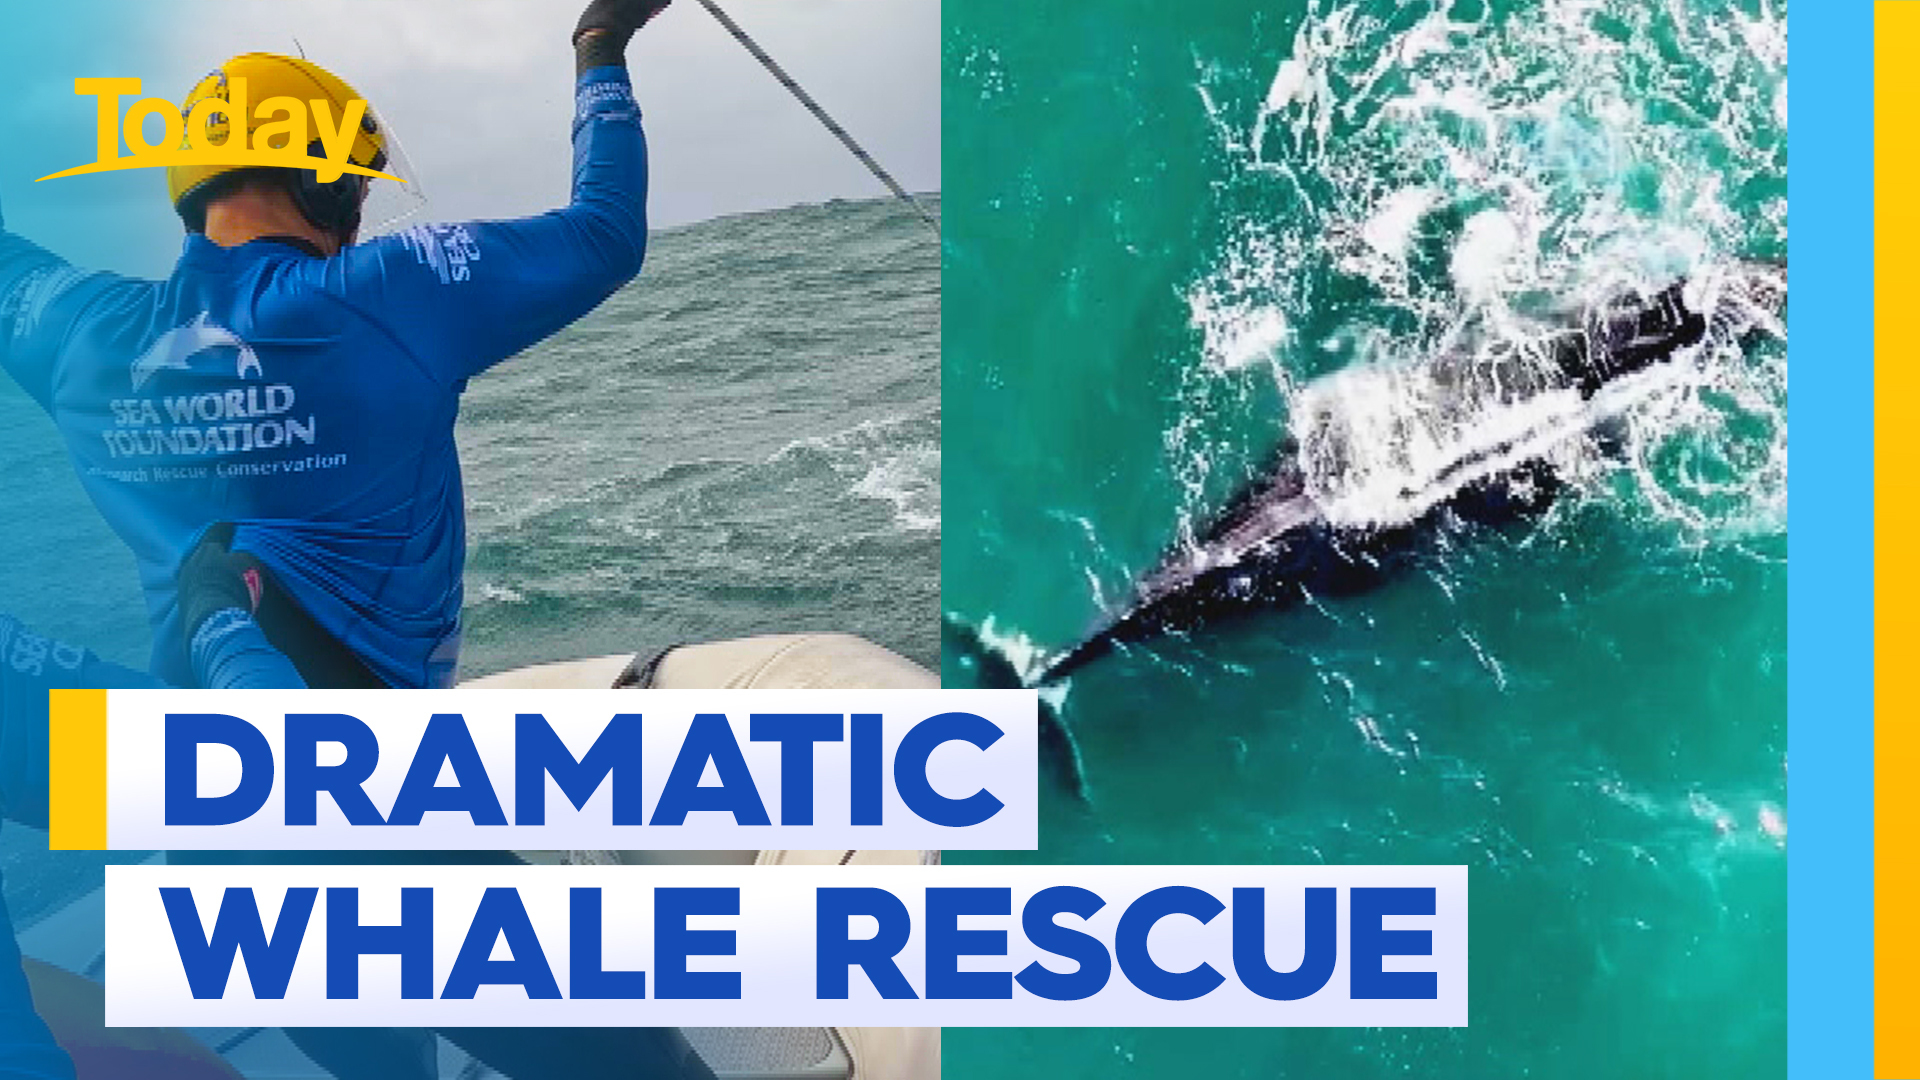 Sea World divers pull off dramatic rescue of young humpback whale